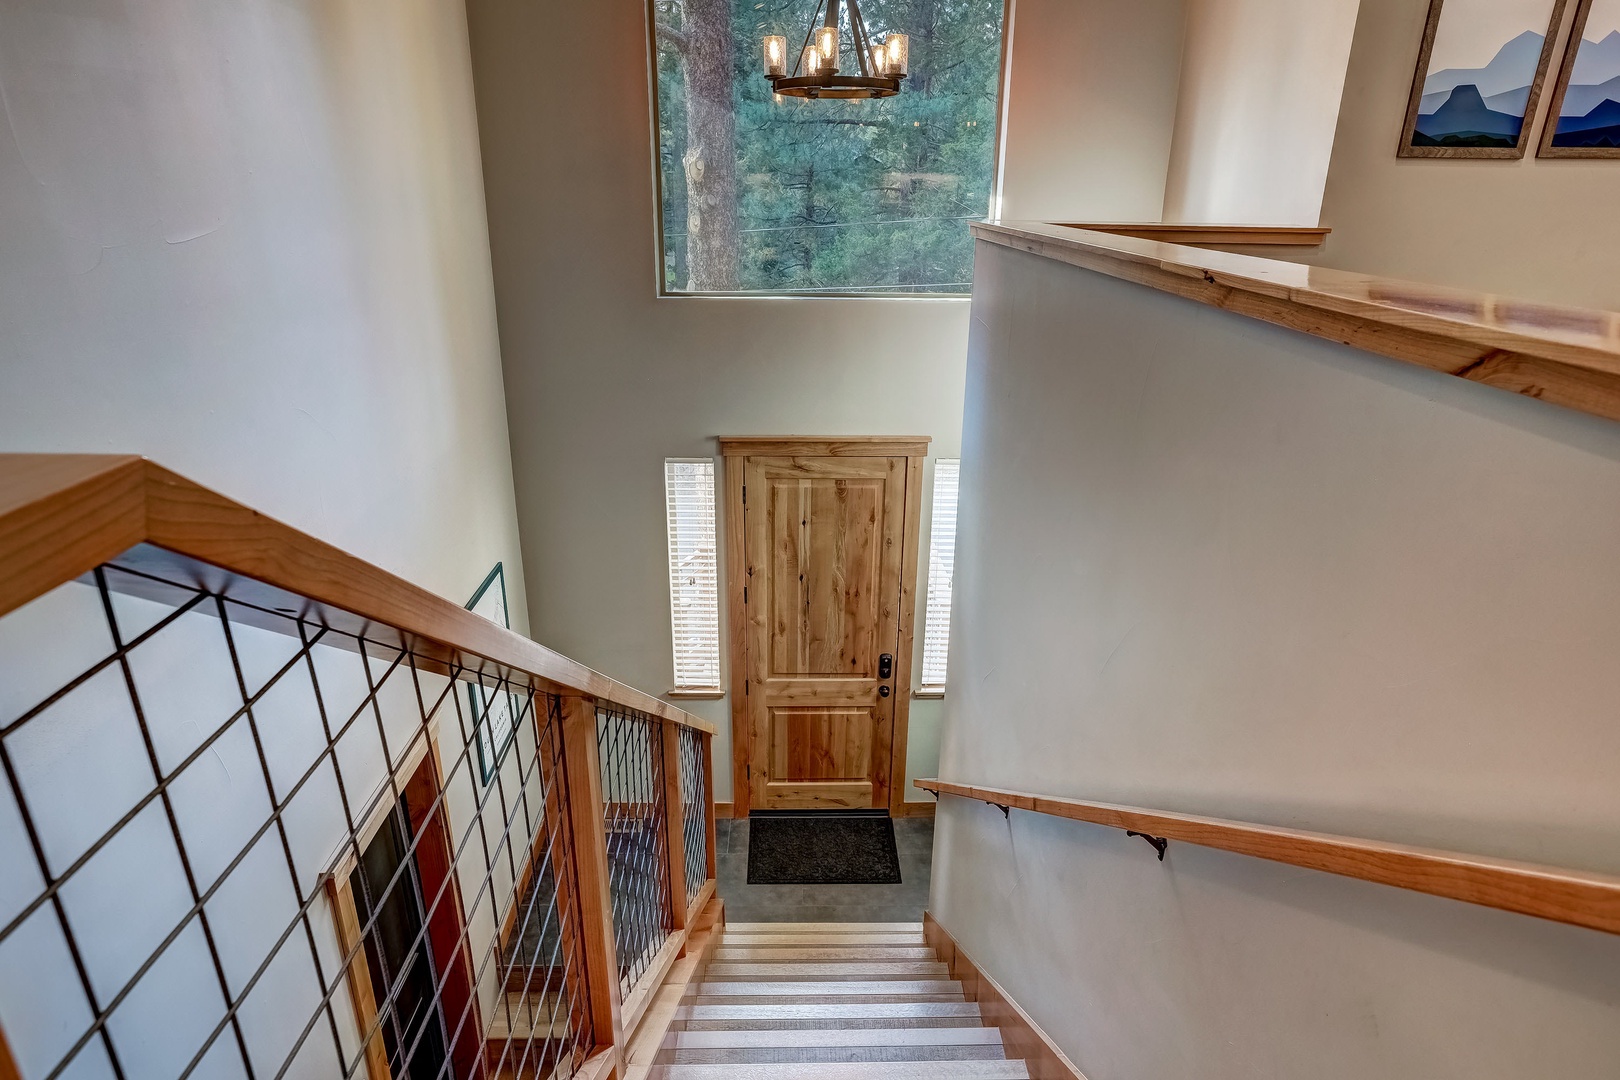 Stairs to entryway